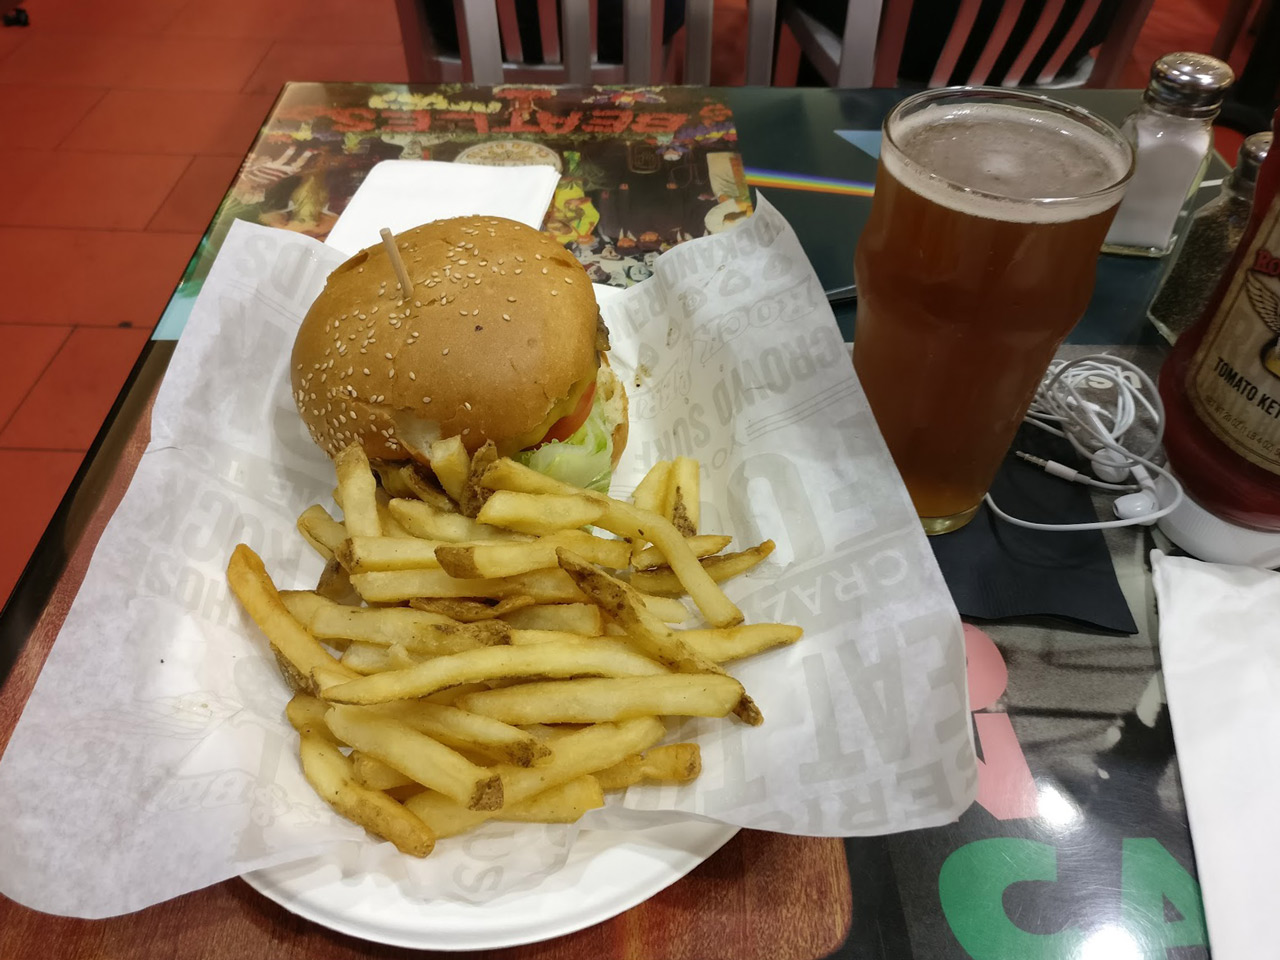 I did have some time for a nice burger and a glass of locally brew beer before boarding. Very satisfied.